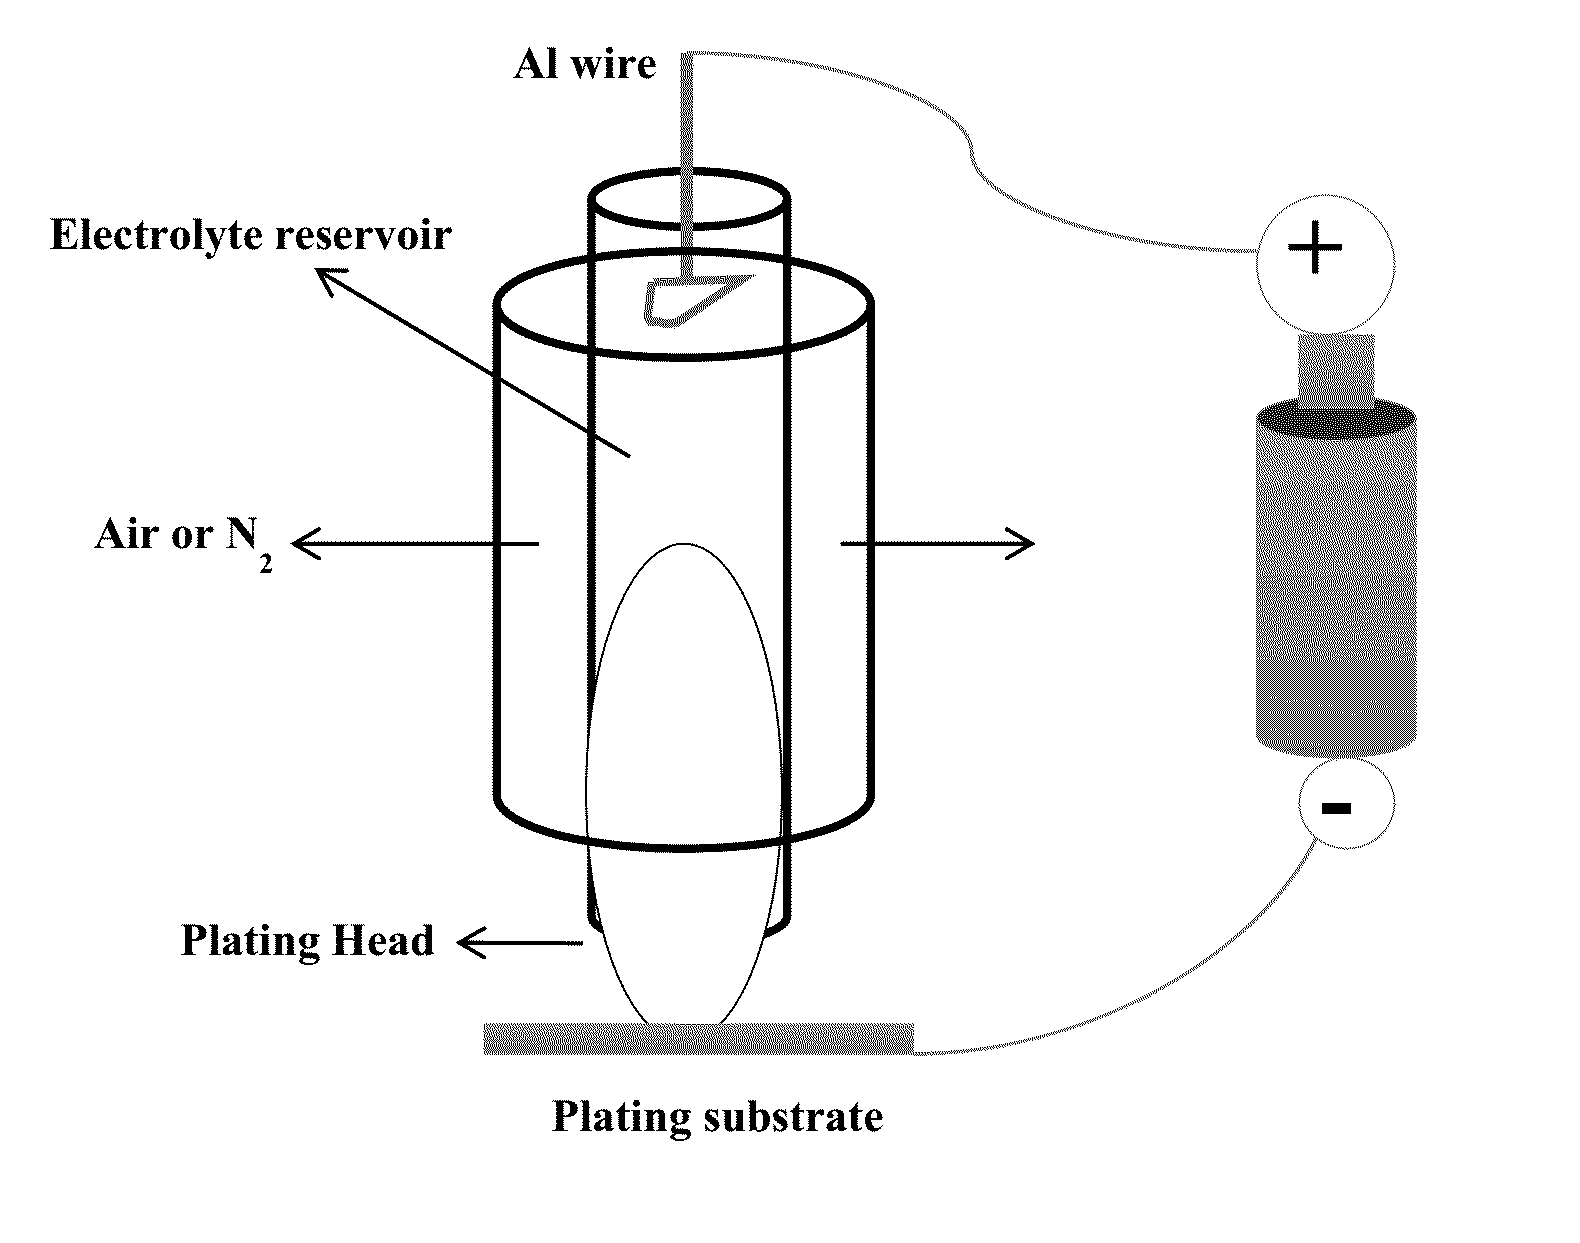 Aluminum deposition devices and their use in spot electroplating of aluminum